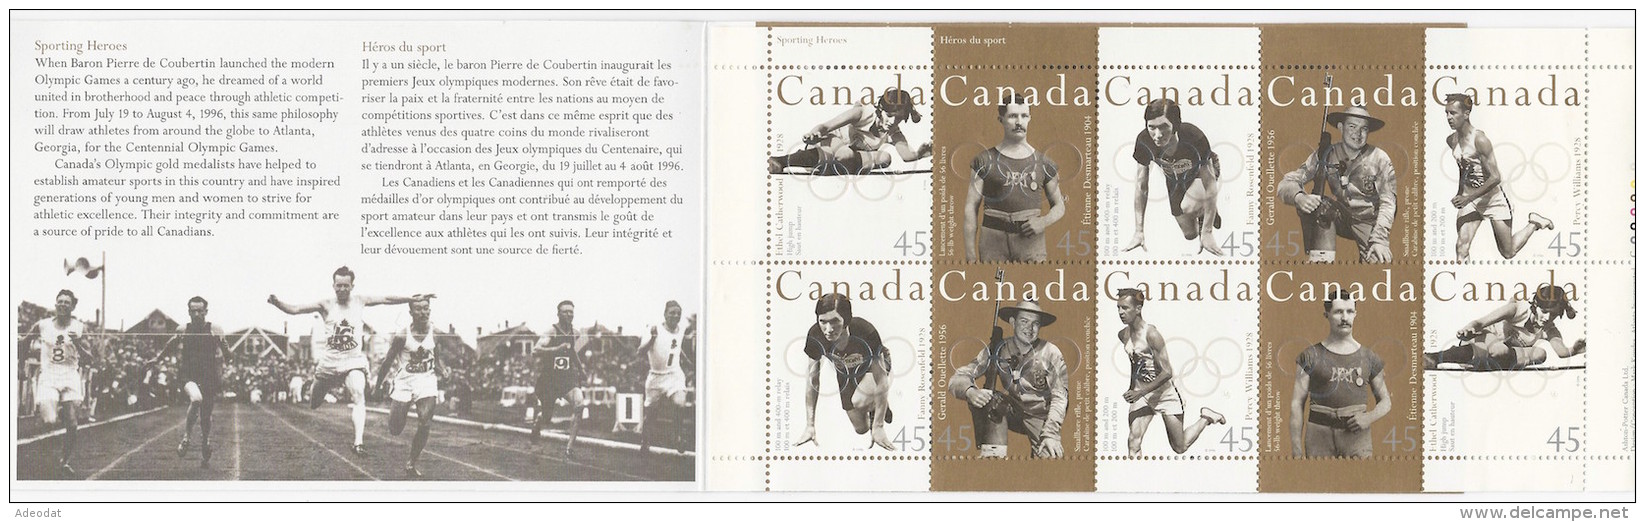 CANADA 1996 CANADIAN OLYMPIC GOLD MEDALISTS SCOTT 1612b BOOKLET PANE OF 10 VALUE US  $11.25 - Booklets Pages